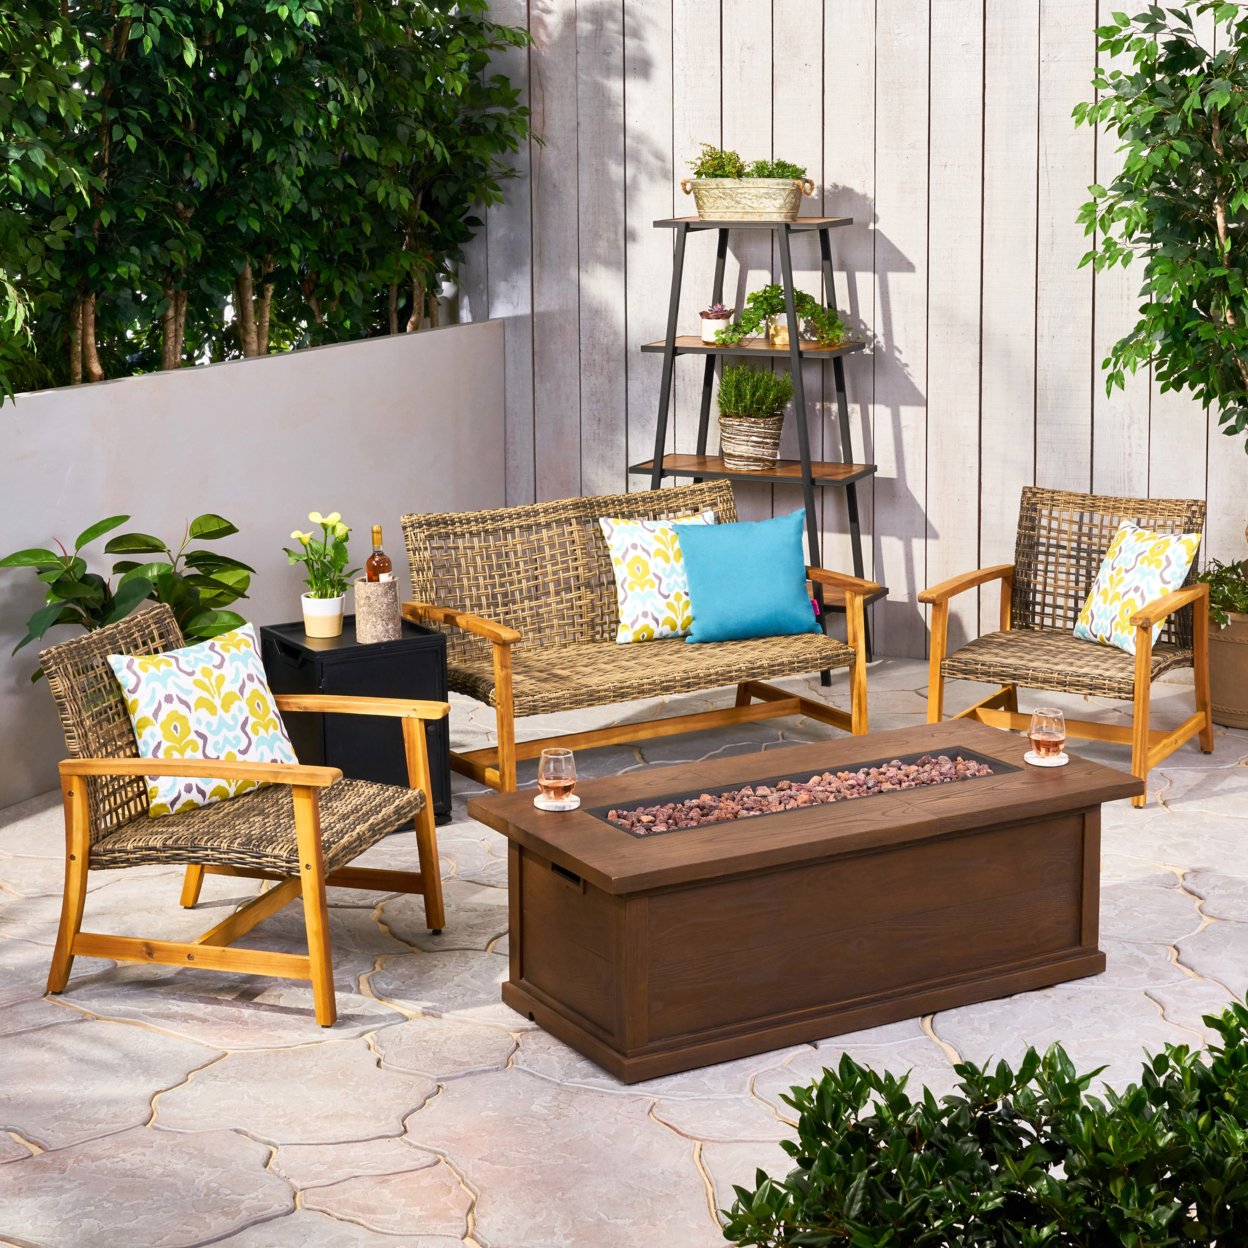 Rachel Outdoor 5 Piece Wood And Wicker Chat Set With Fire Pit - Mixed Mocha + Natural Finish + Brown + Black